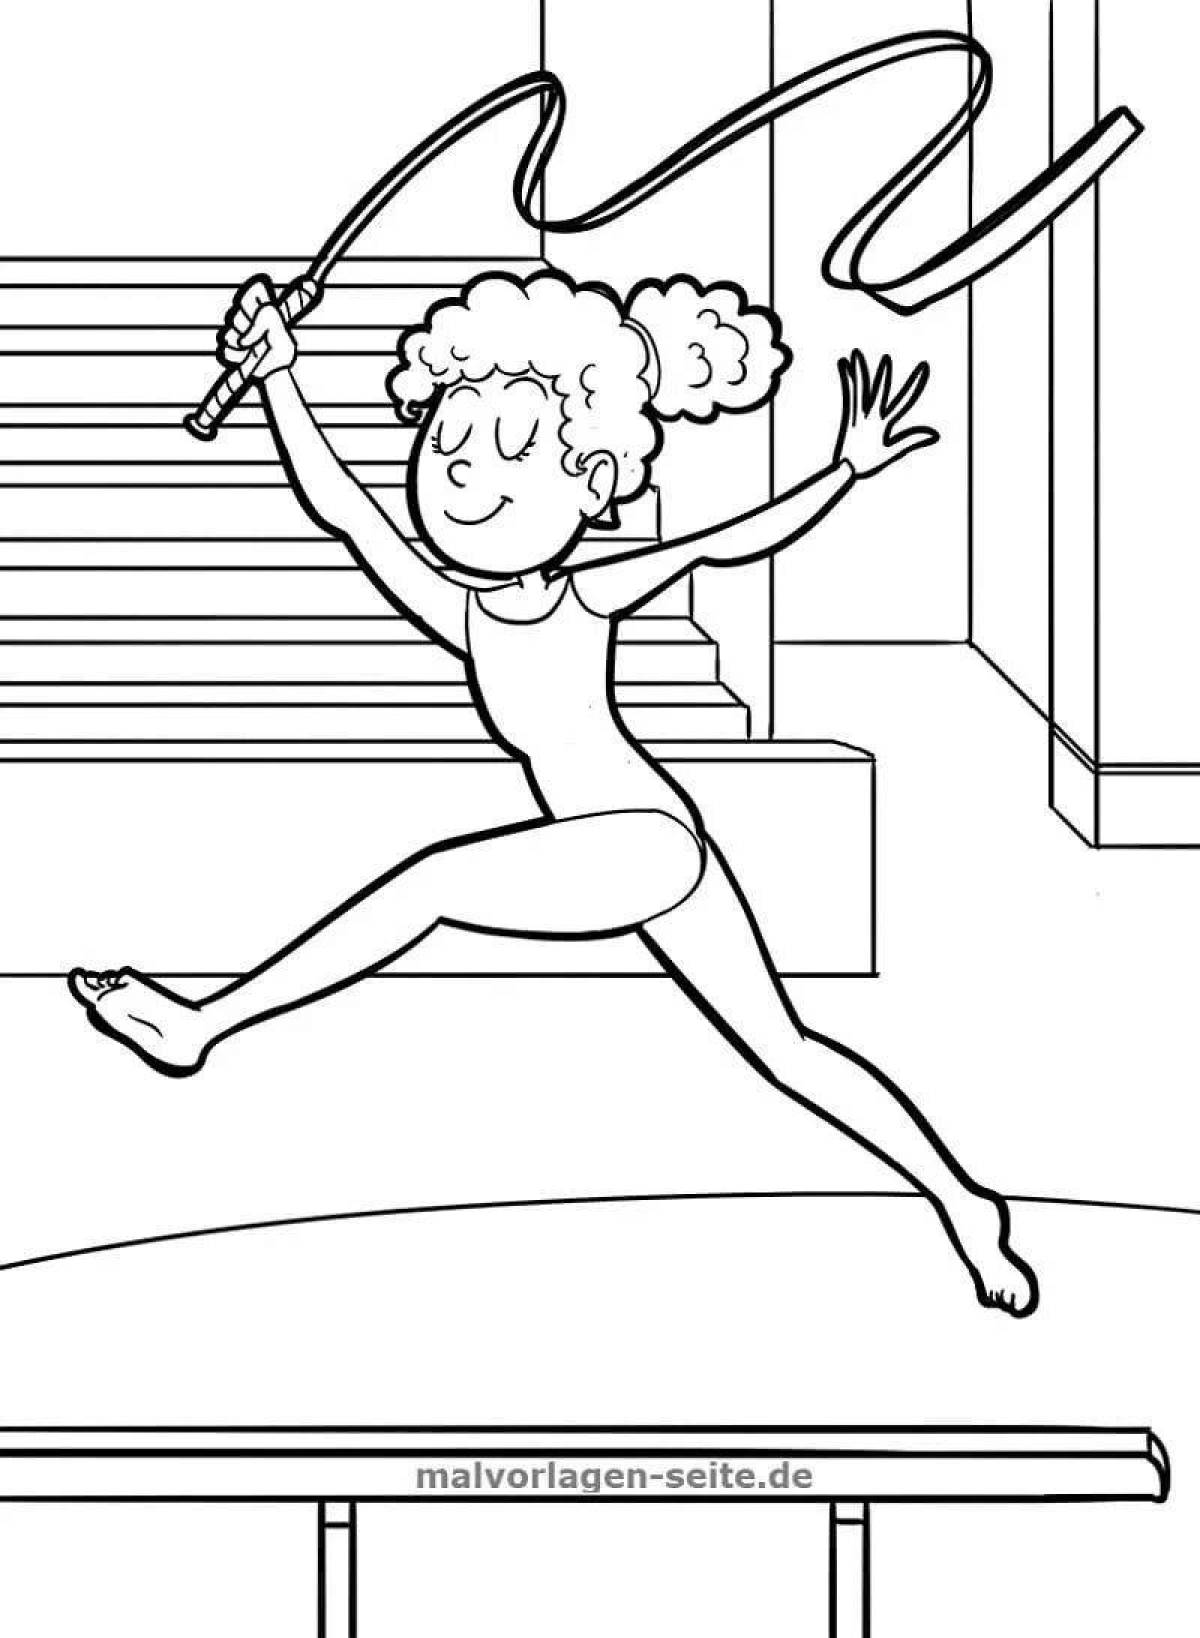 Bright gymnastic coloring book for the little ones